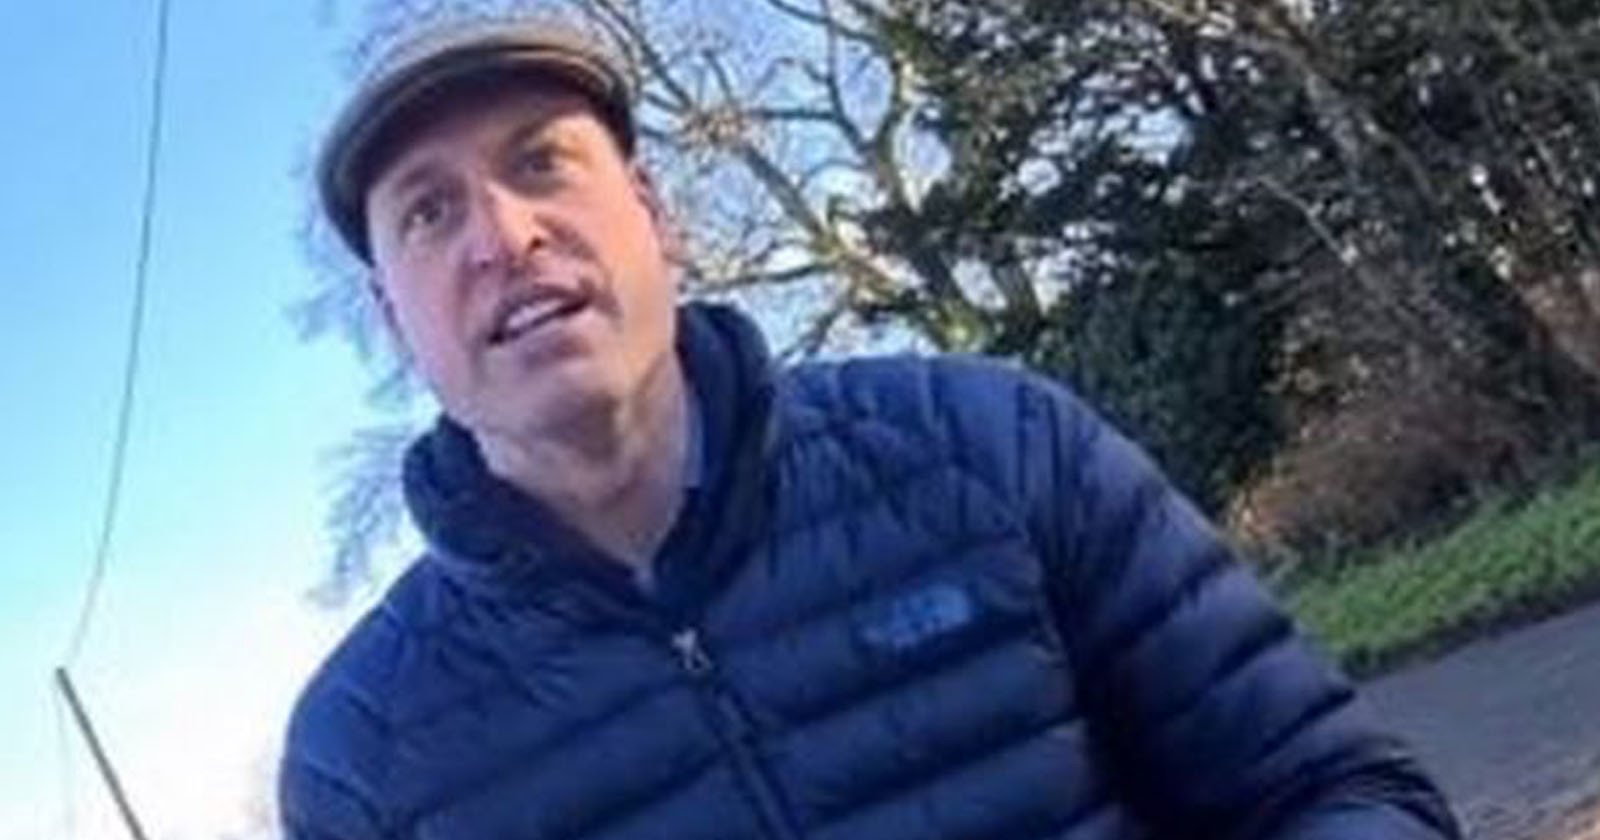 Prince William is Filmed Berating Photographer for Stalking his Kids